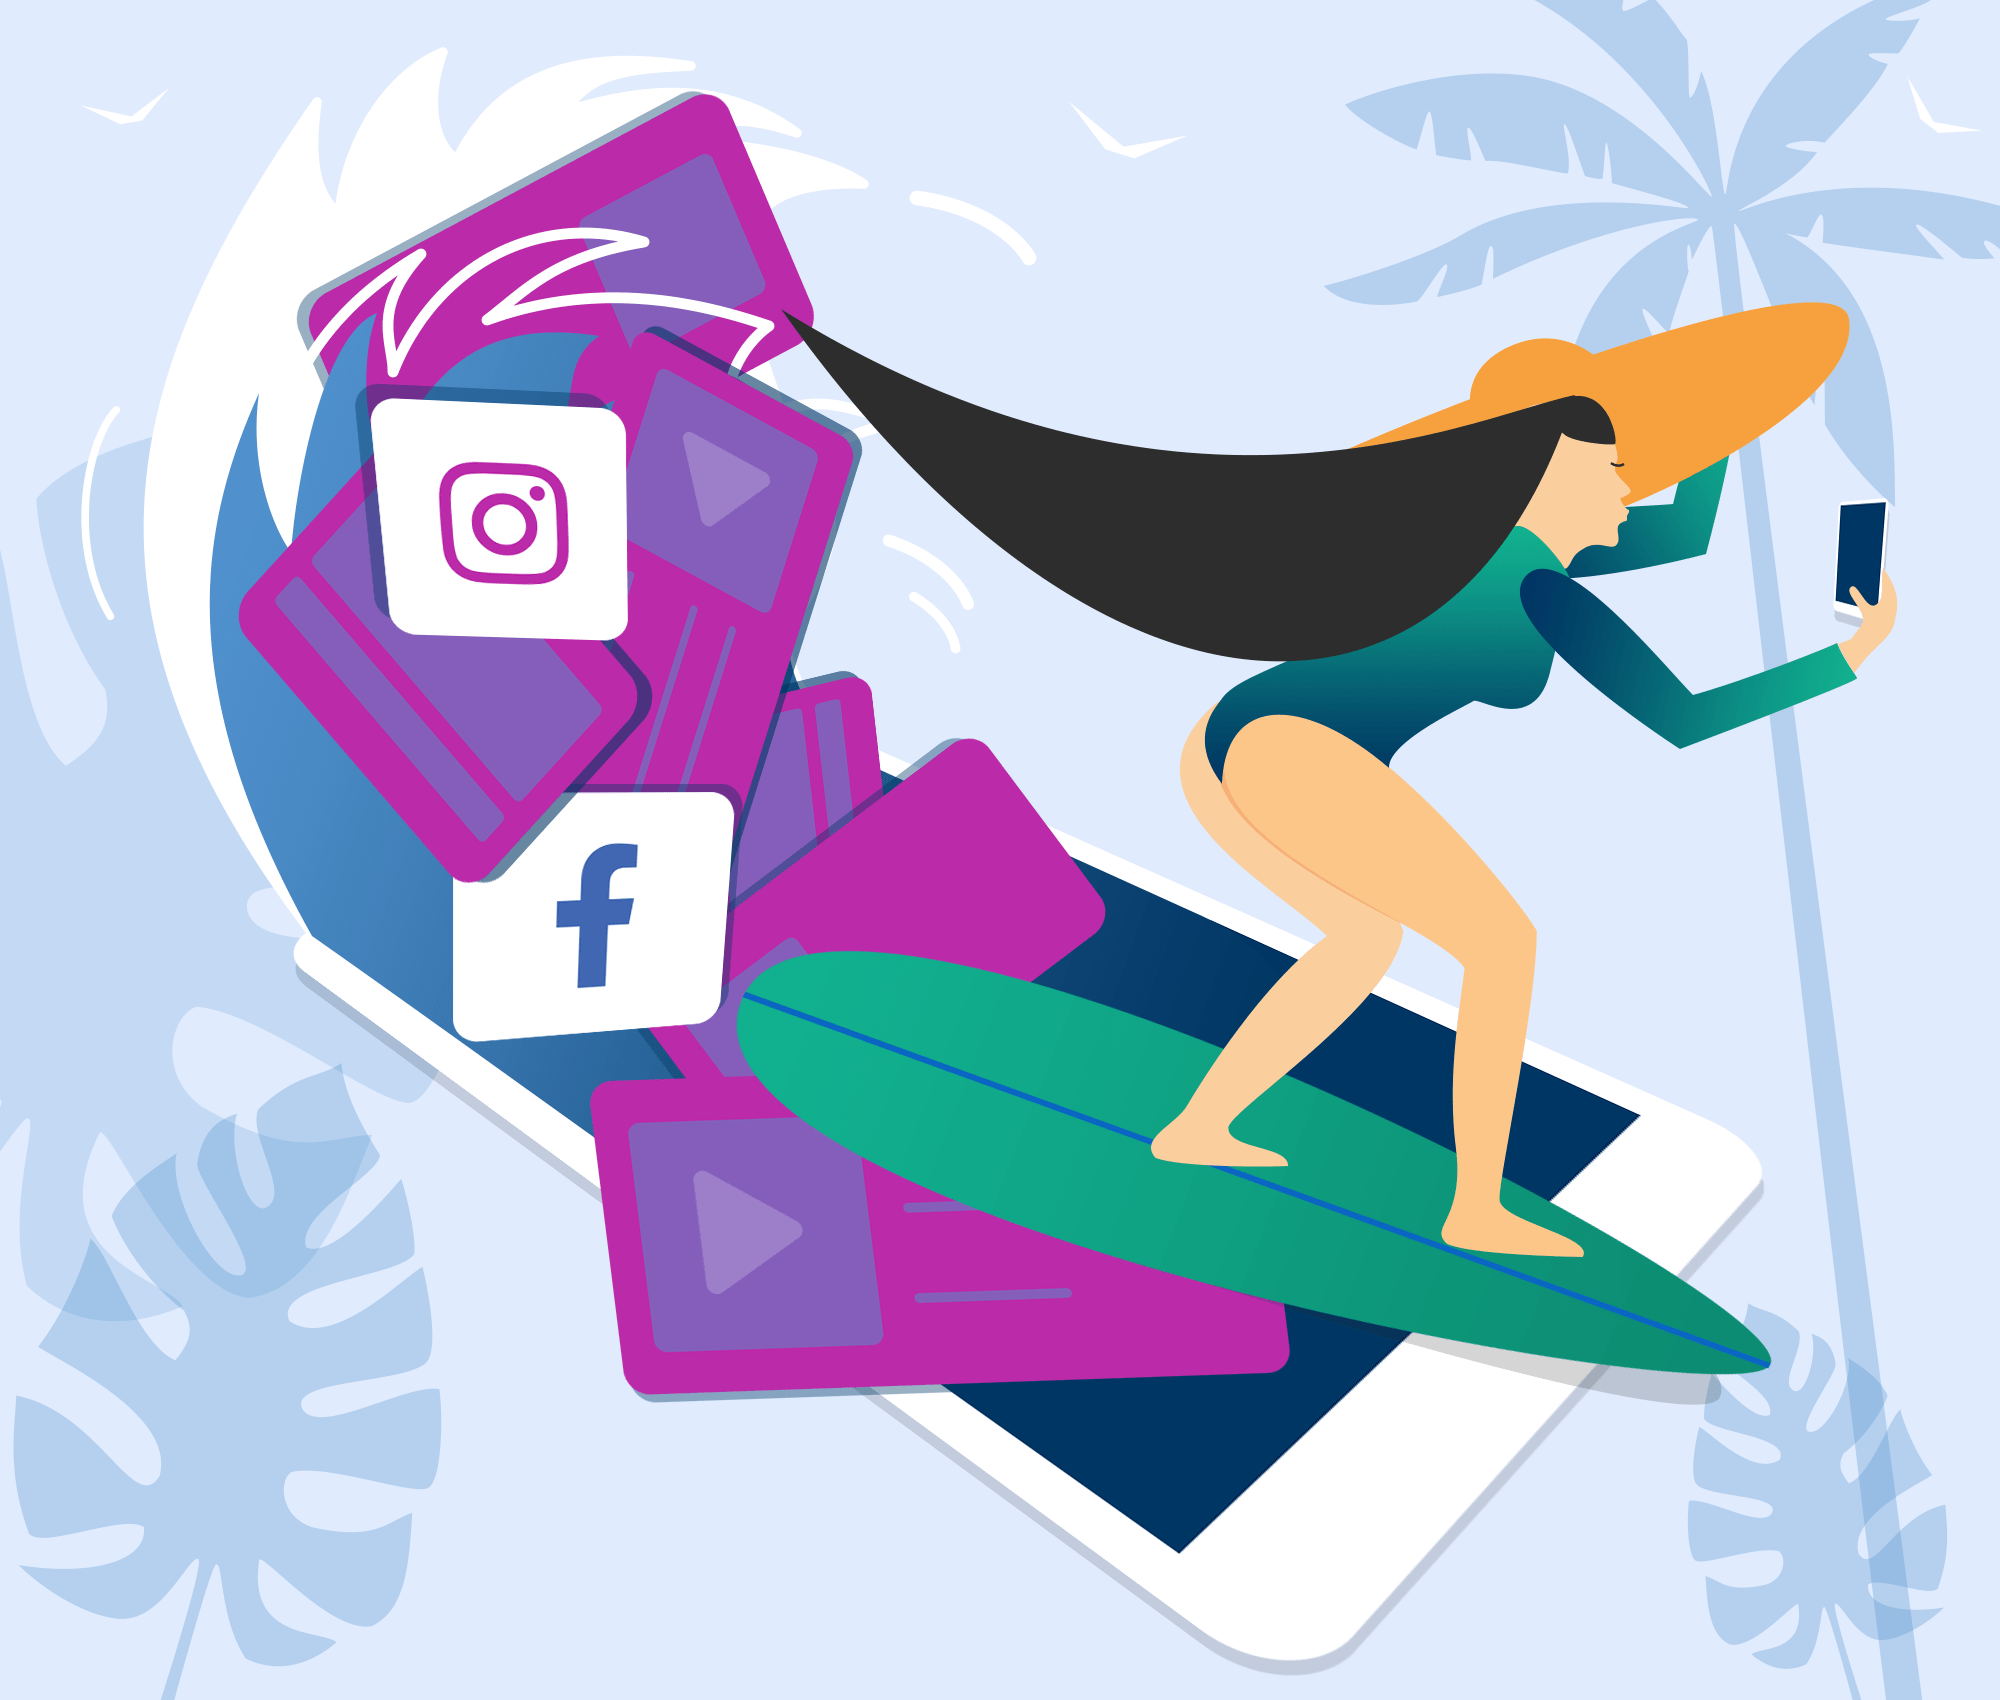 Social Media Posting Trends for Summer 2021 – Make Your Posts Stand Out (Part 1)